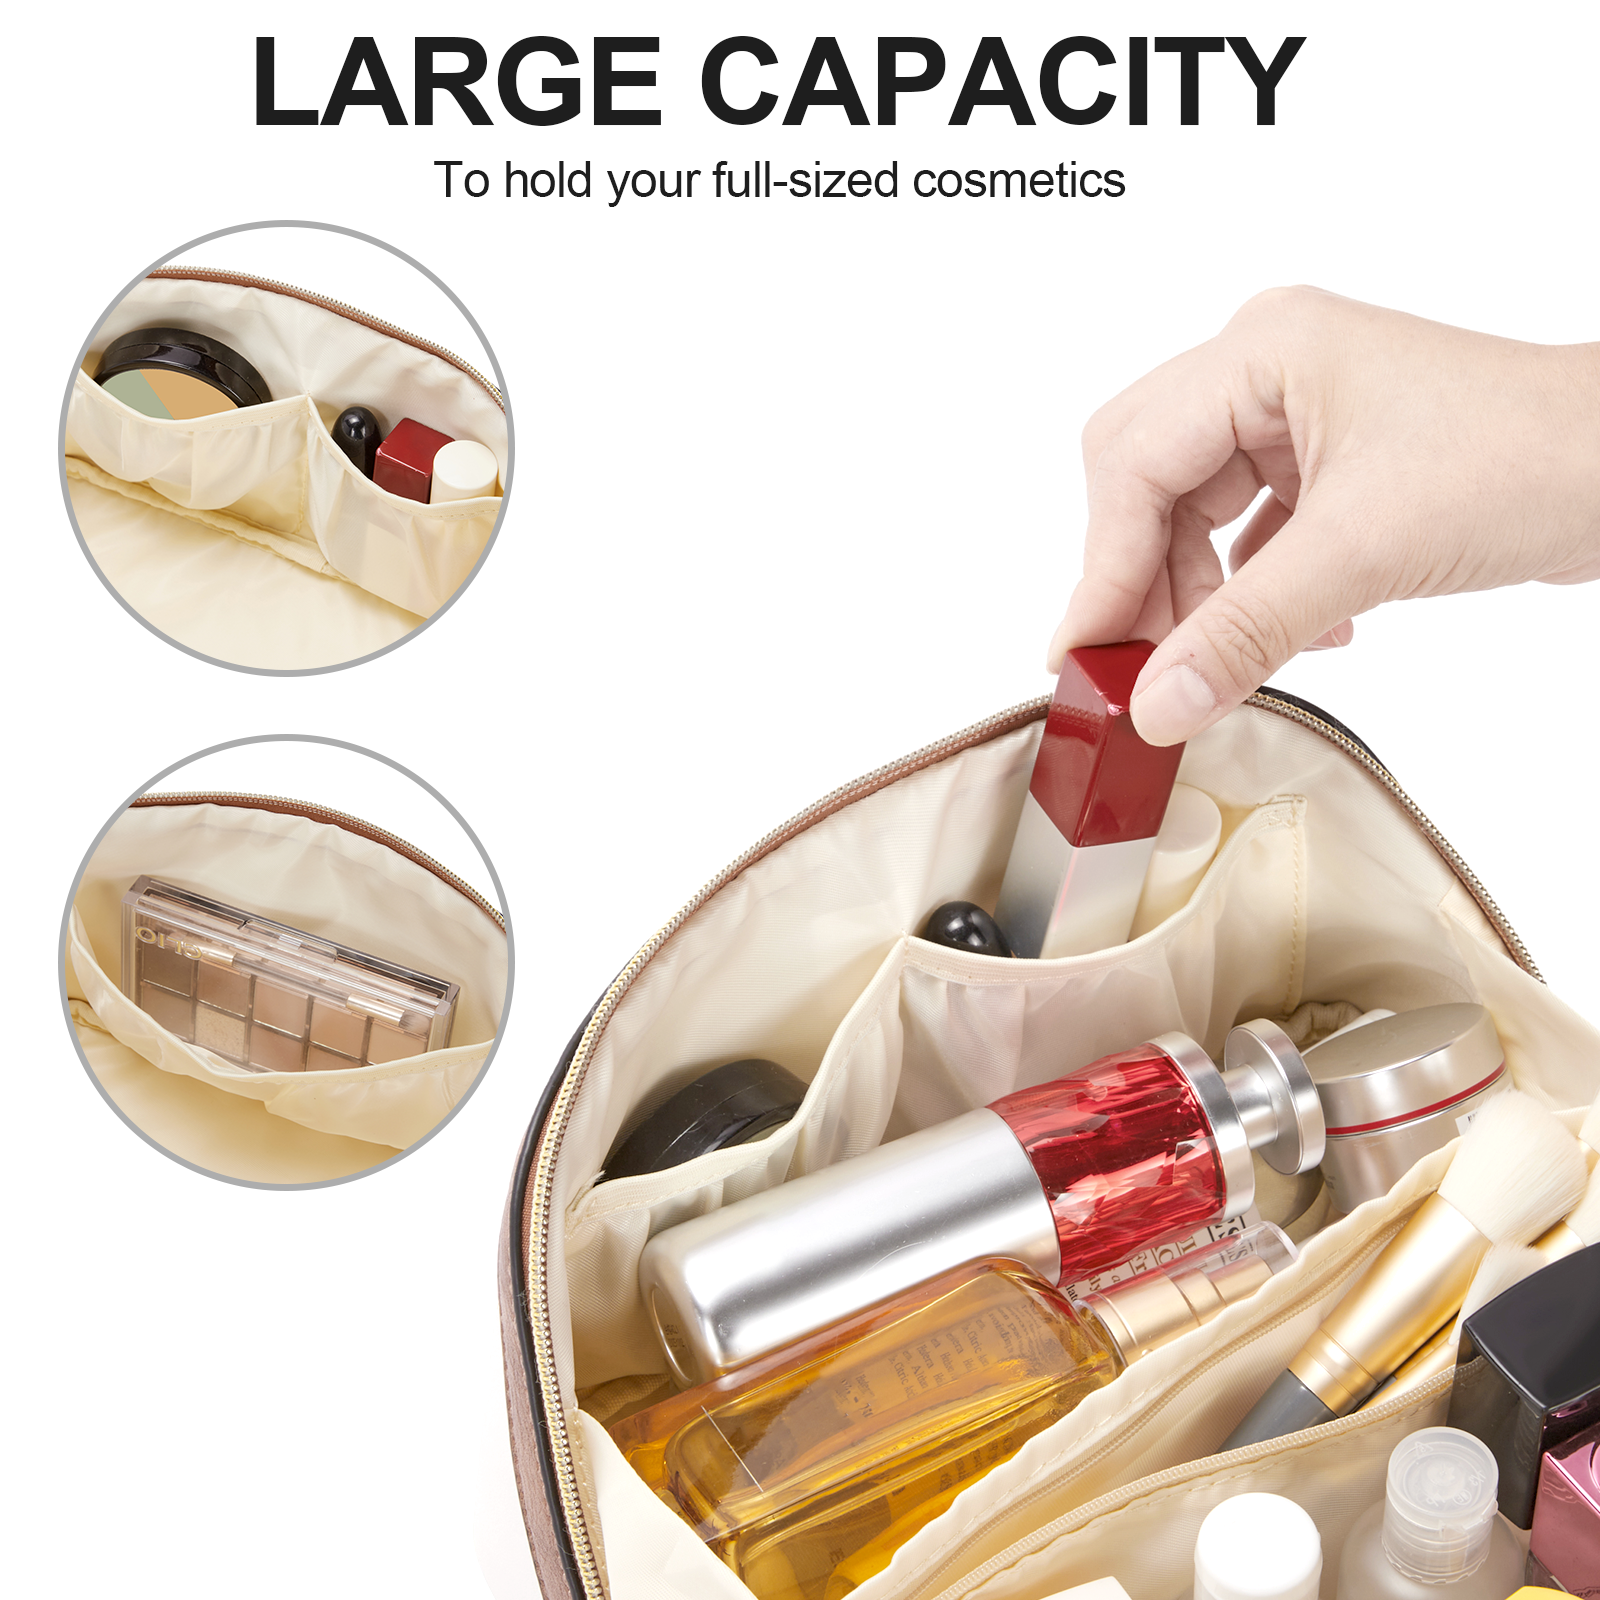 CLUCI Makeup Bag PU Leather Waterproof Large Capacity Cosmetic Bag Organizer Toiletry Bag with Handle and Divider Travel Bag